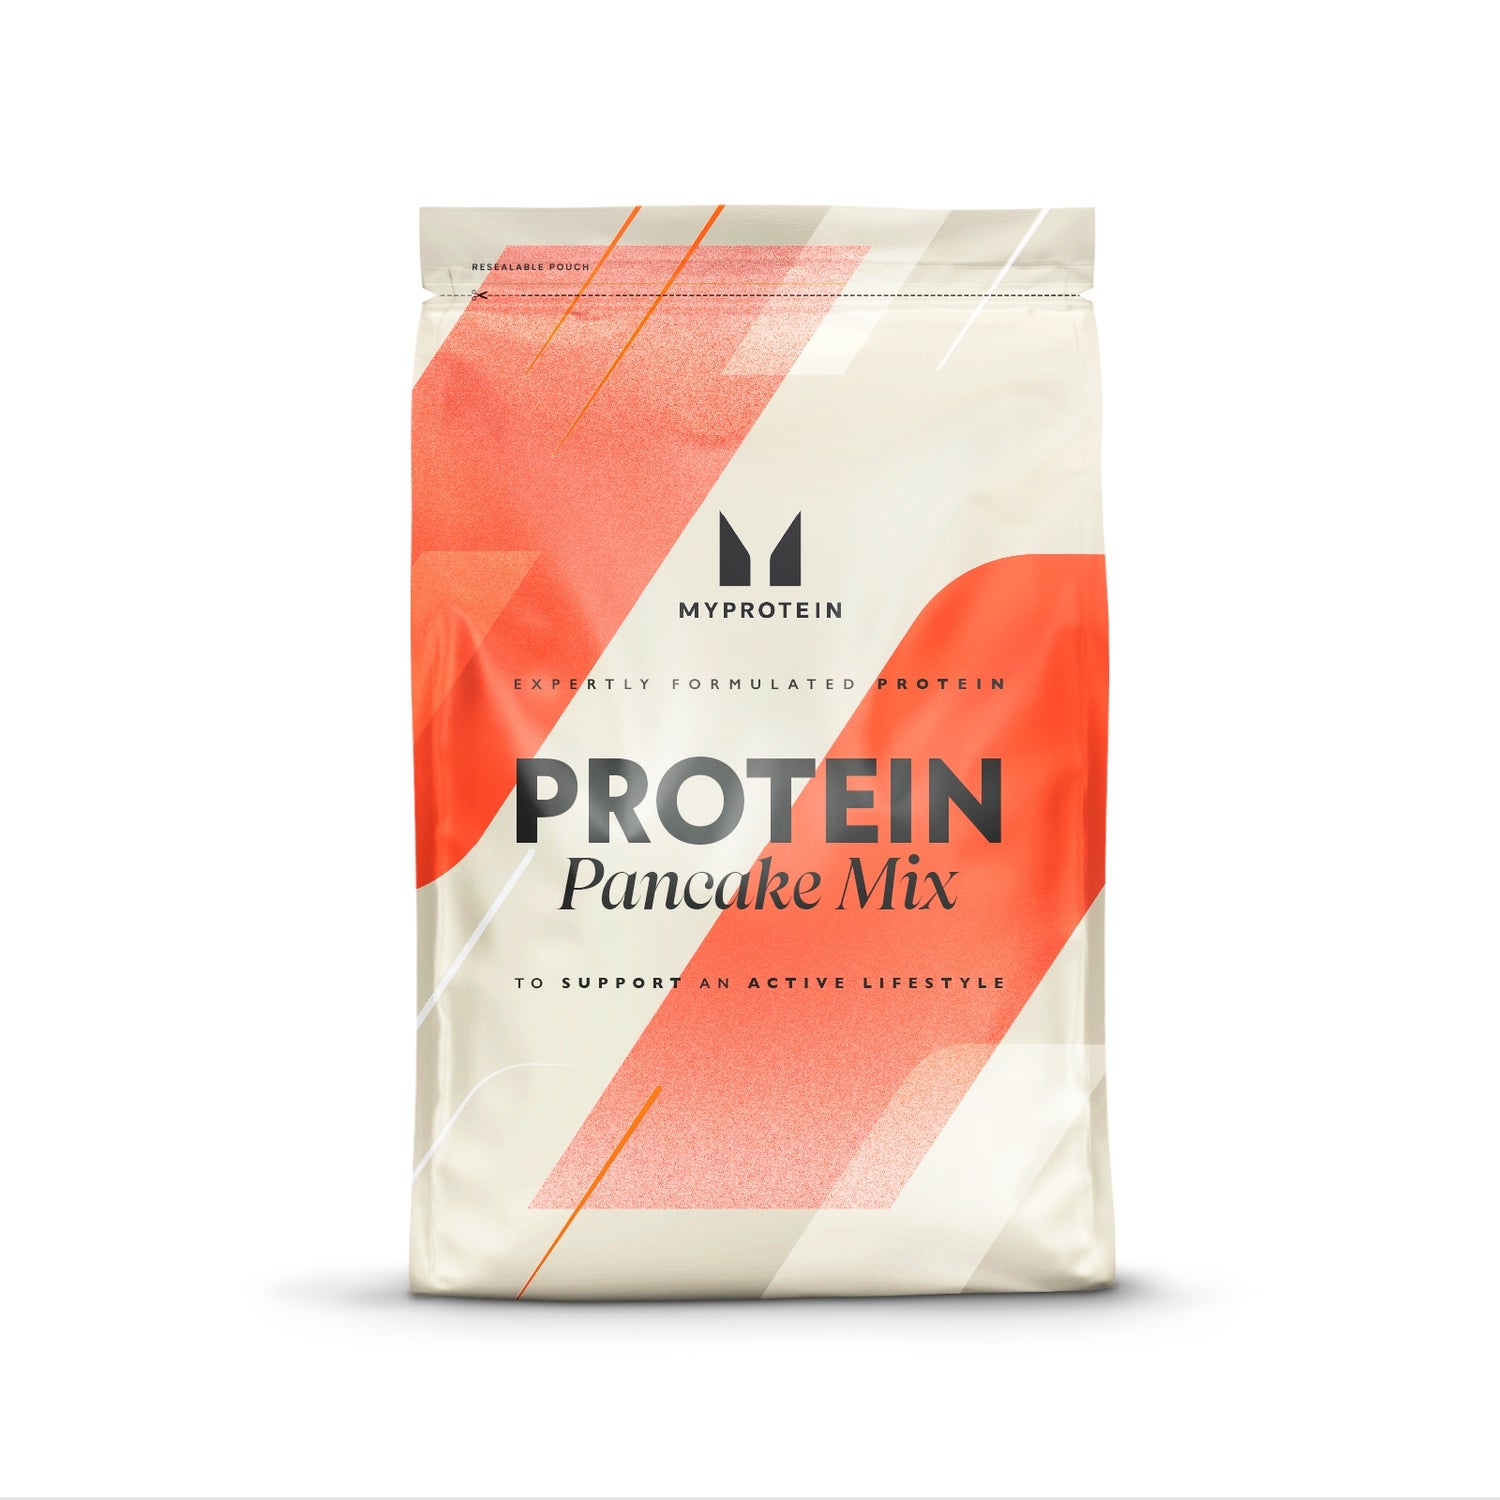 Protein Pancake Mix - 2.2lb - Unflavored